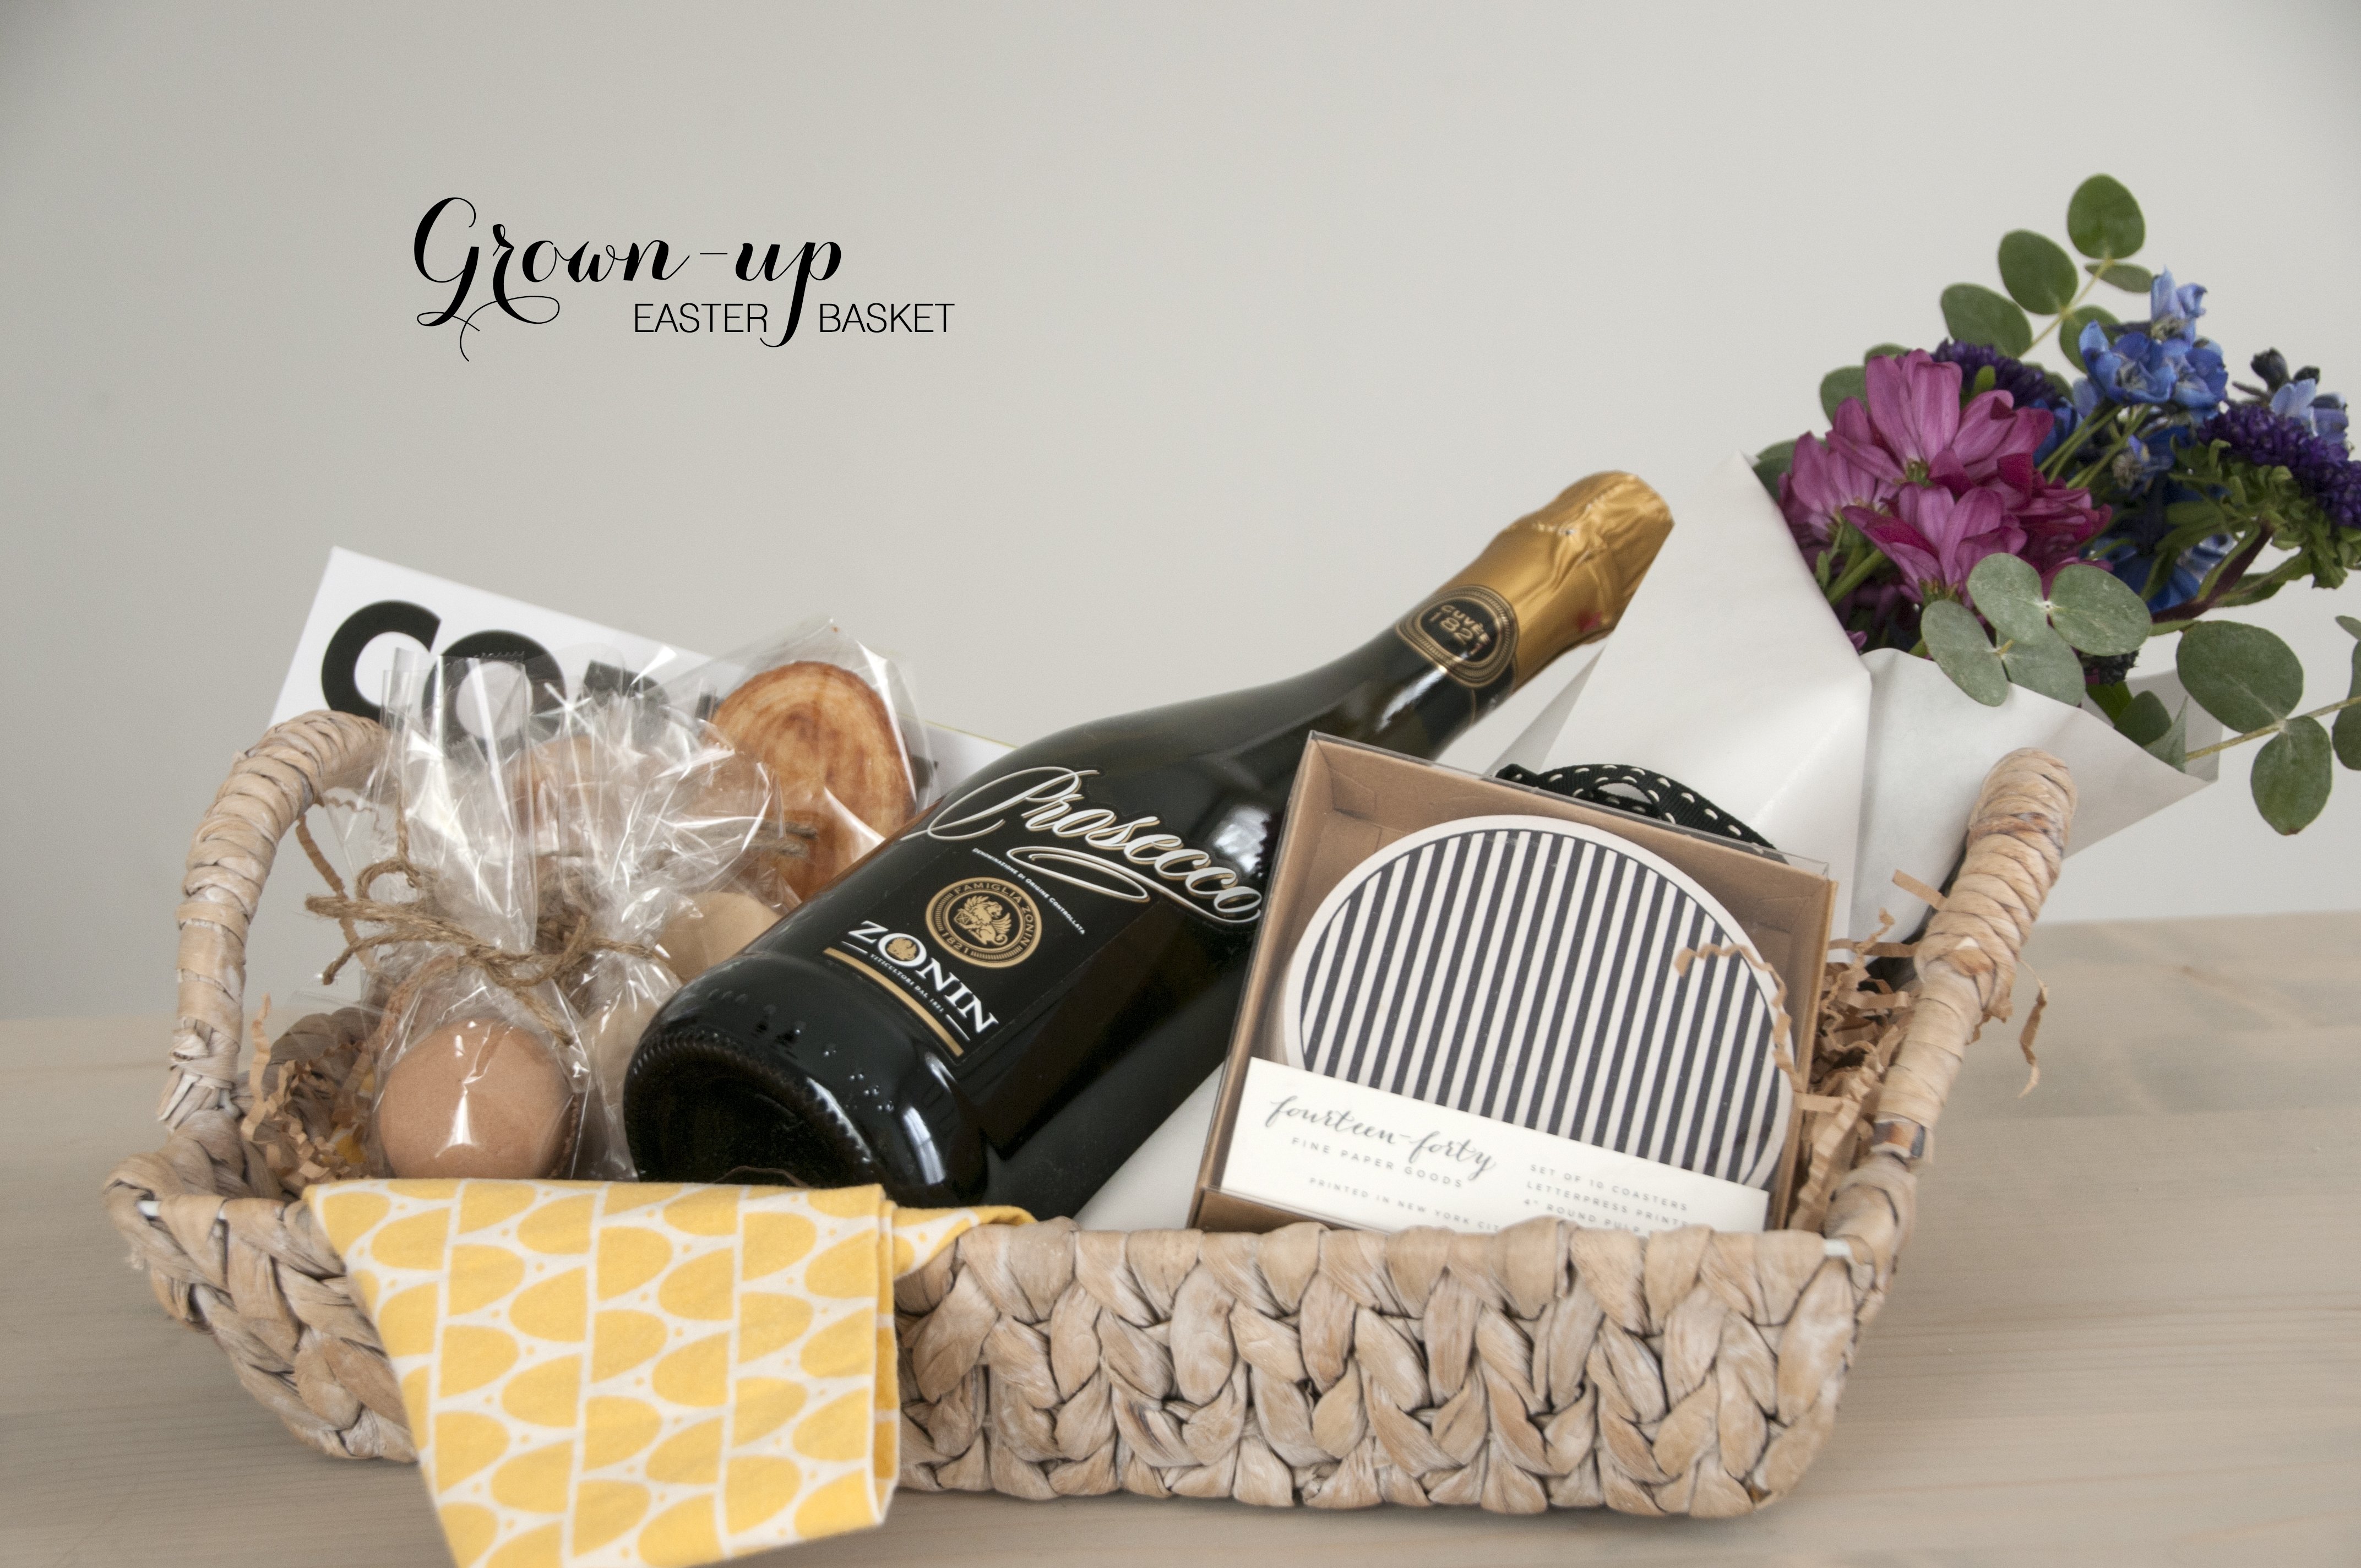 10 Beautiful Easter Baskets Ideas For Adults an easter basket for grown ups earnest home co 1 2022